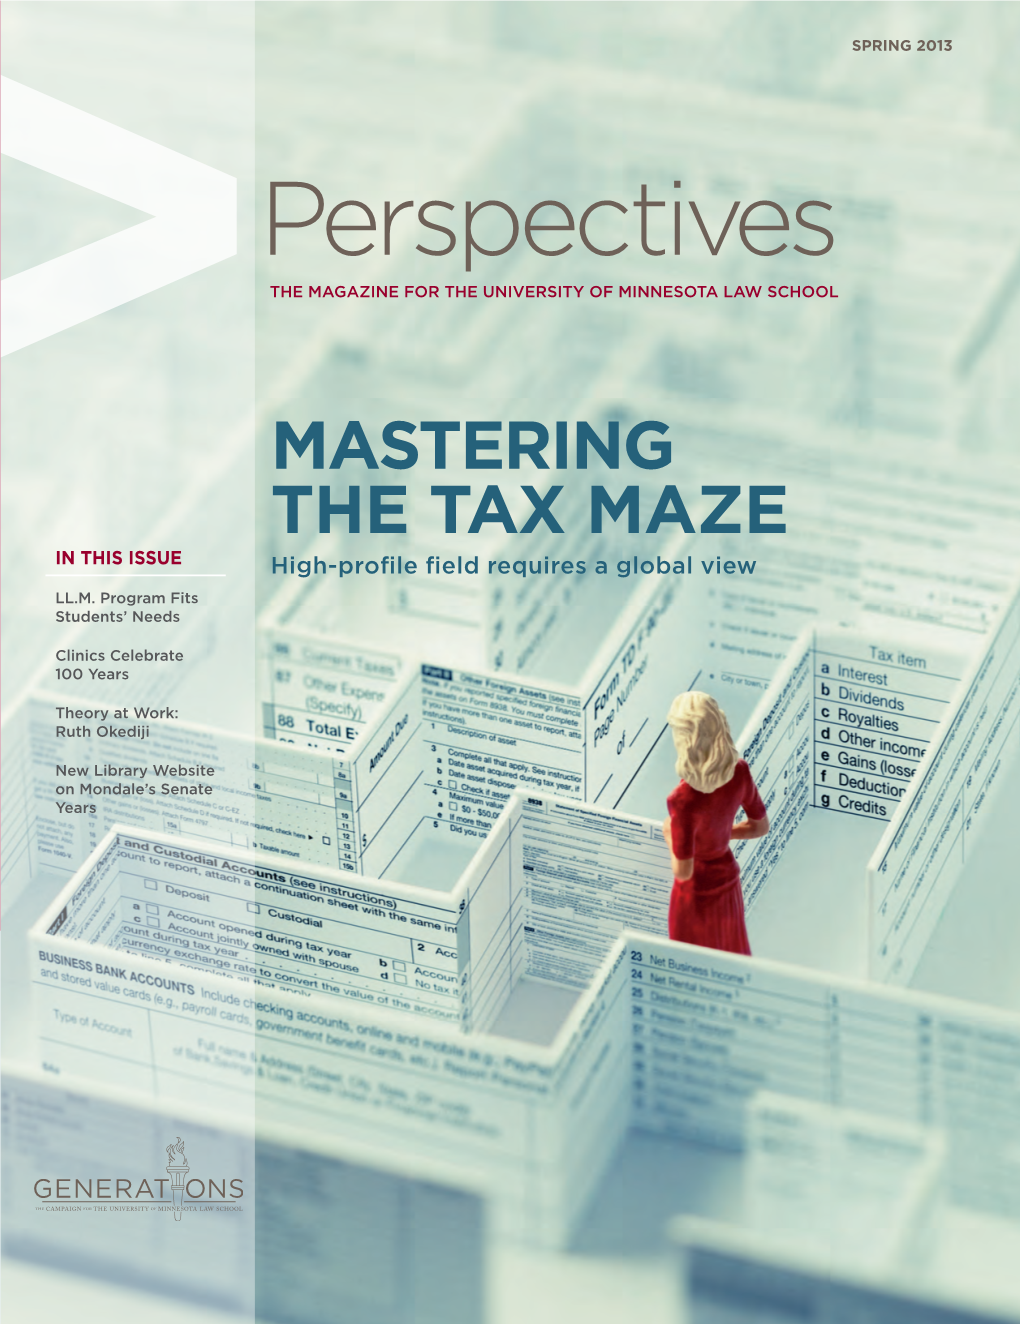 Perspectives the Magazine for the University of Minnesota Law School